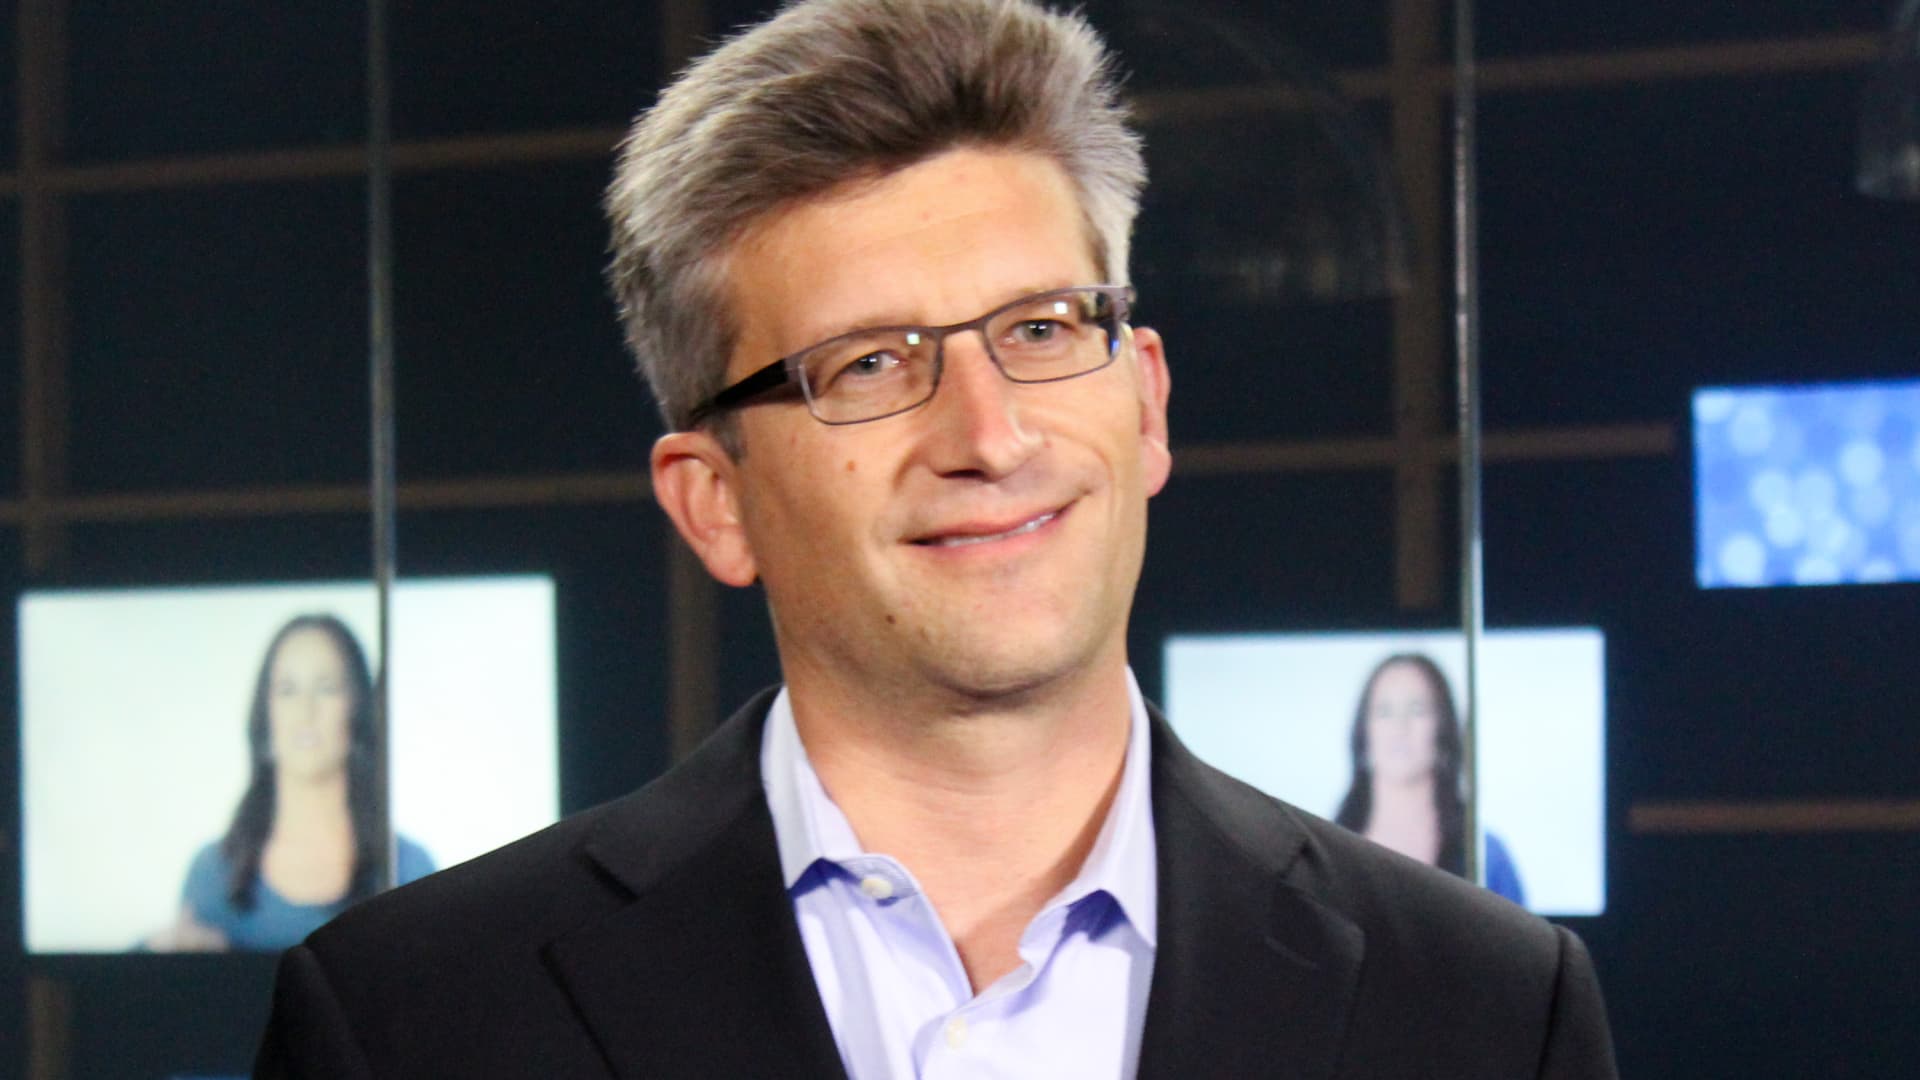 Meta gets new CFO as David Wehner moves to chief strategy officer role – CNBC